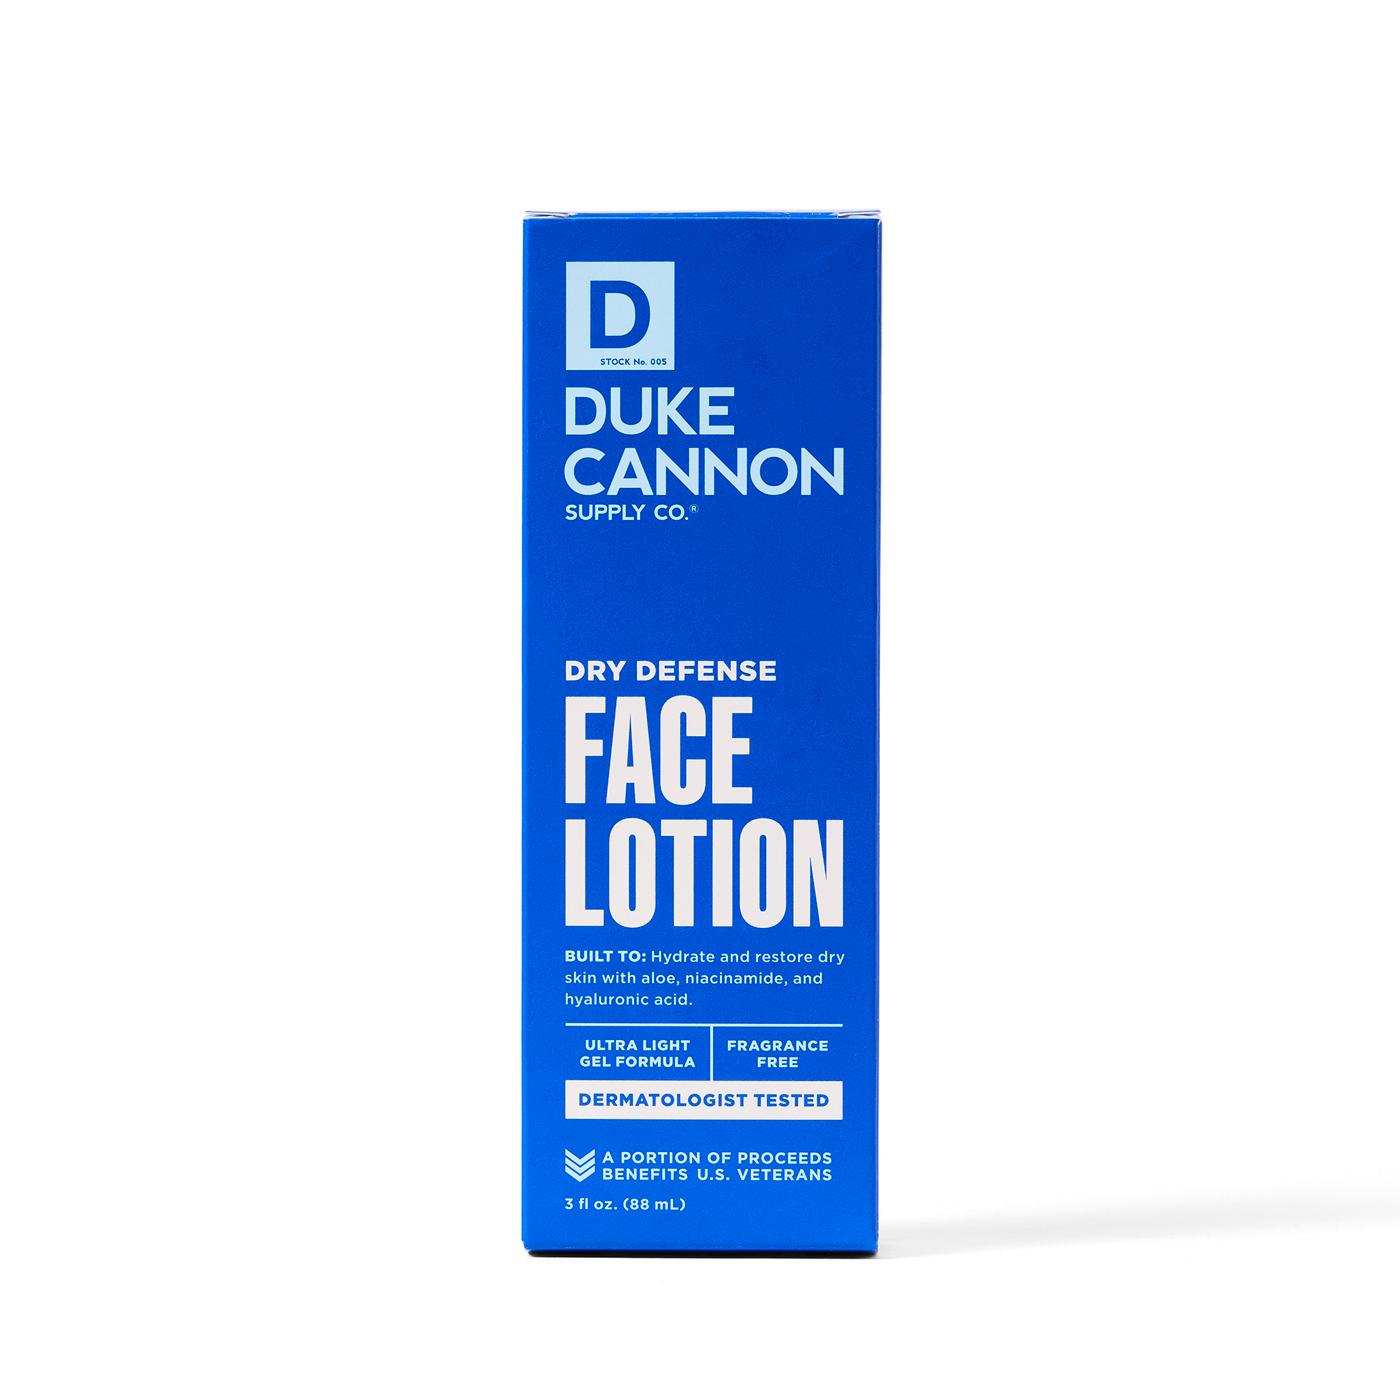 Duke Cannon Hydrating Face Lotion; image 1 of 2